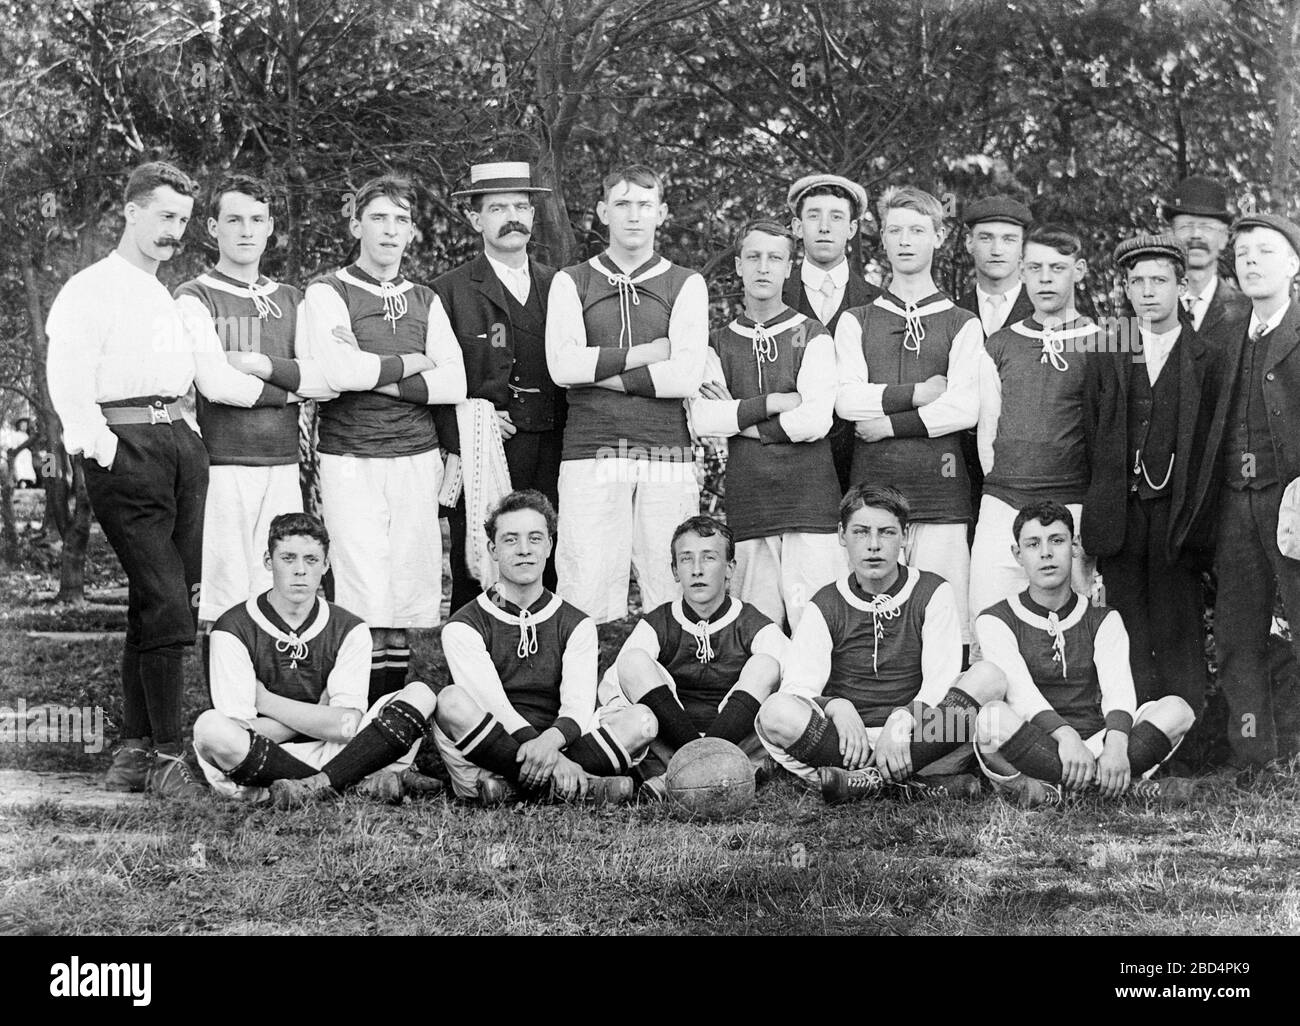 A vintage early Edwardian black and white photograph, taken in England, showing the members of a boys Football, or soccer, team, together with their trainers, coaches, managers etc. Stock Photo